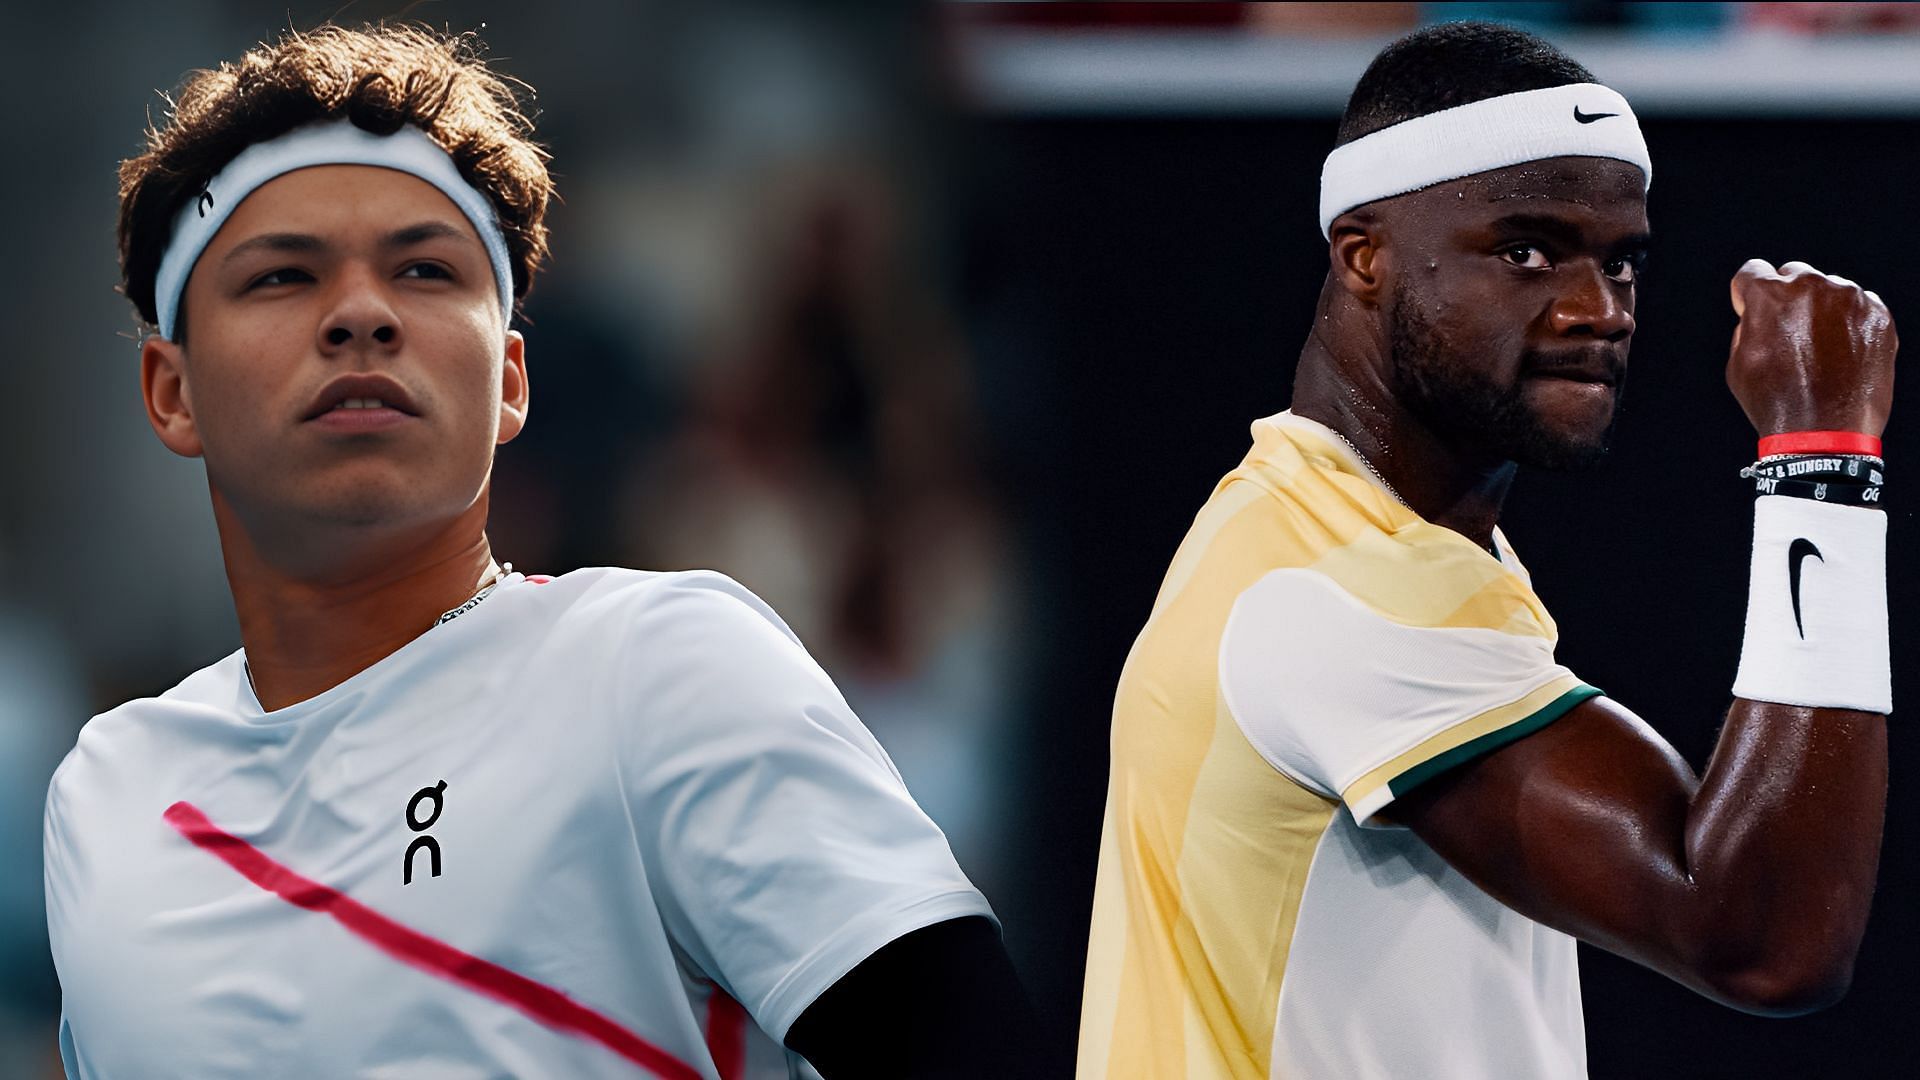 Tennis fans have expressed their disapproval of Ben Shelton and Frances Tiafoe